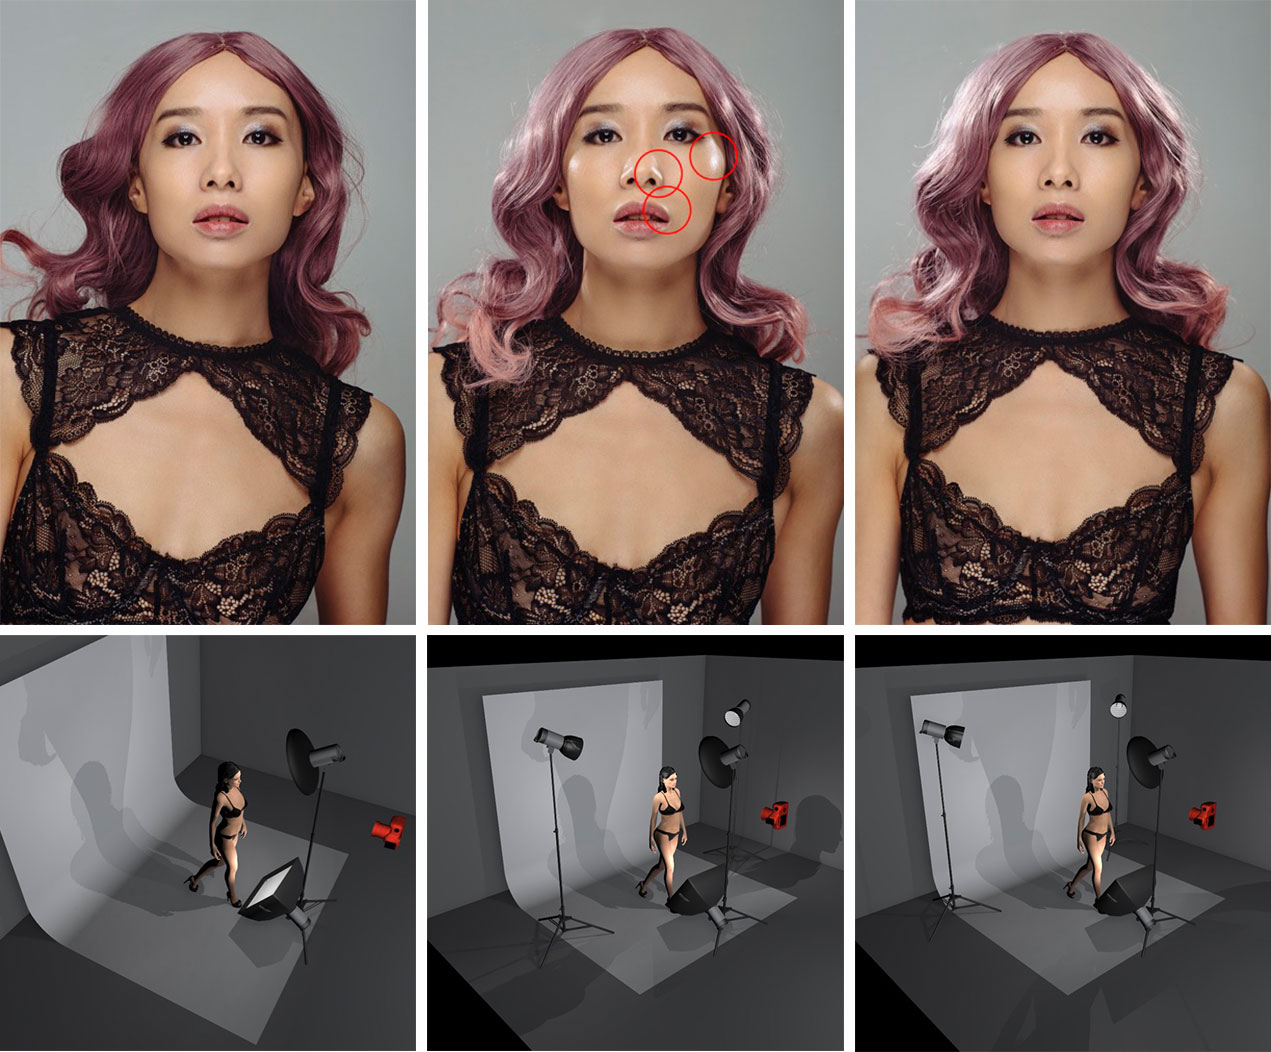 Jake Hicks - Common Lighting Mistakes in Portrait Photography - Poor Hairlight Placement